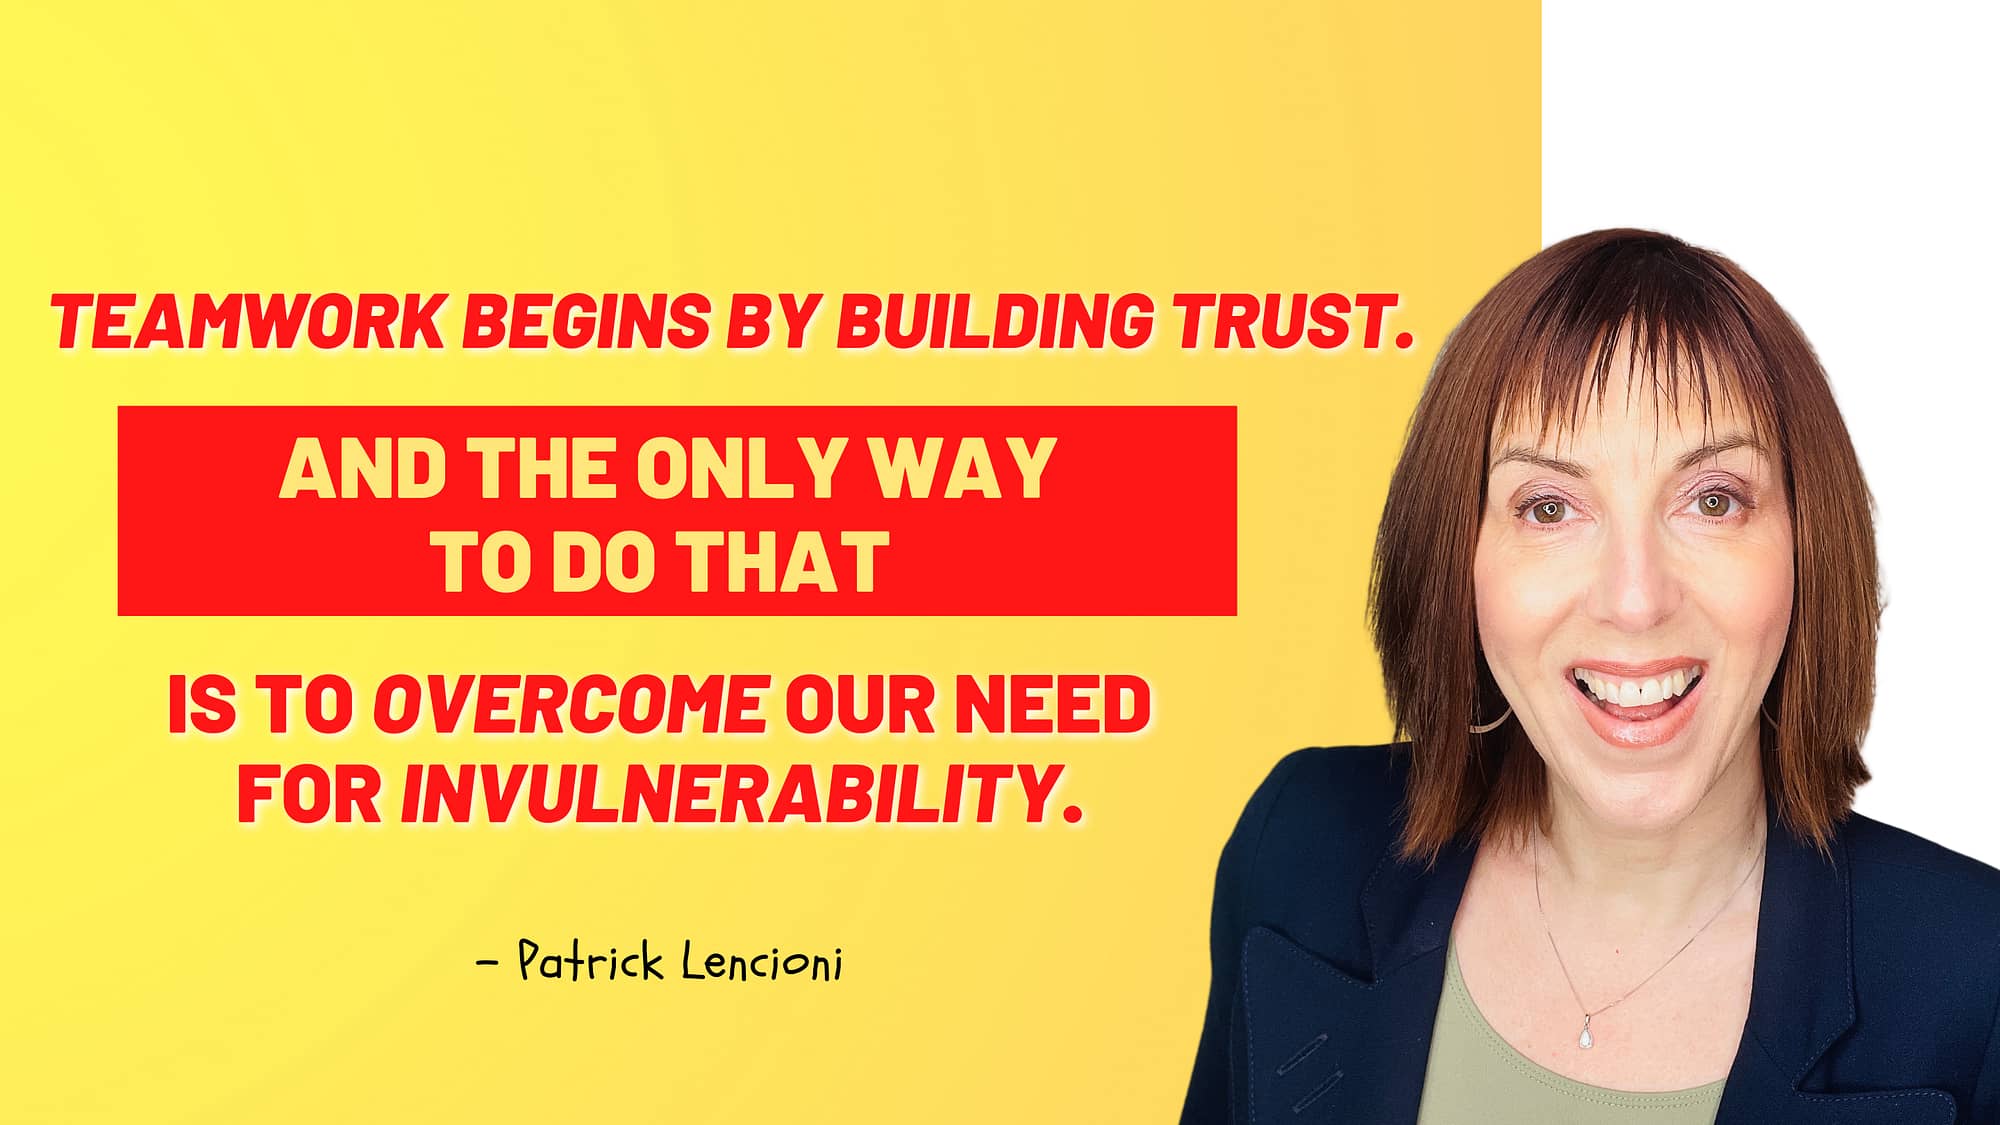 "Teamwork begins by building trust. And the only way to do that is to overcome our need for invulnerability." – Patrick Lencioni